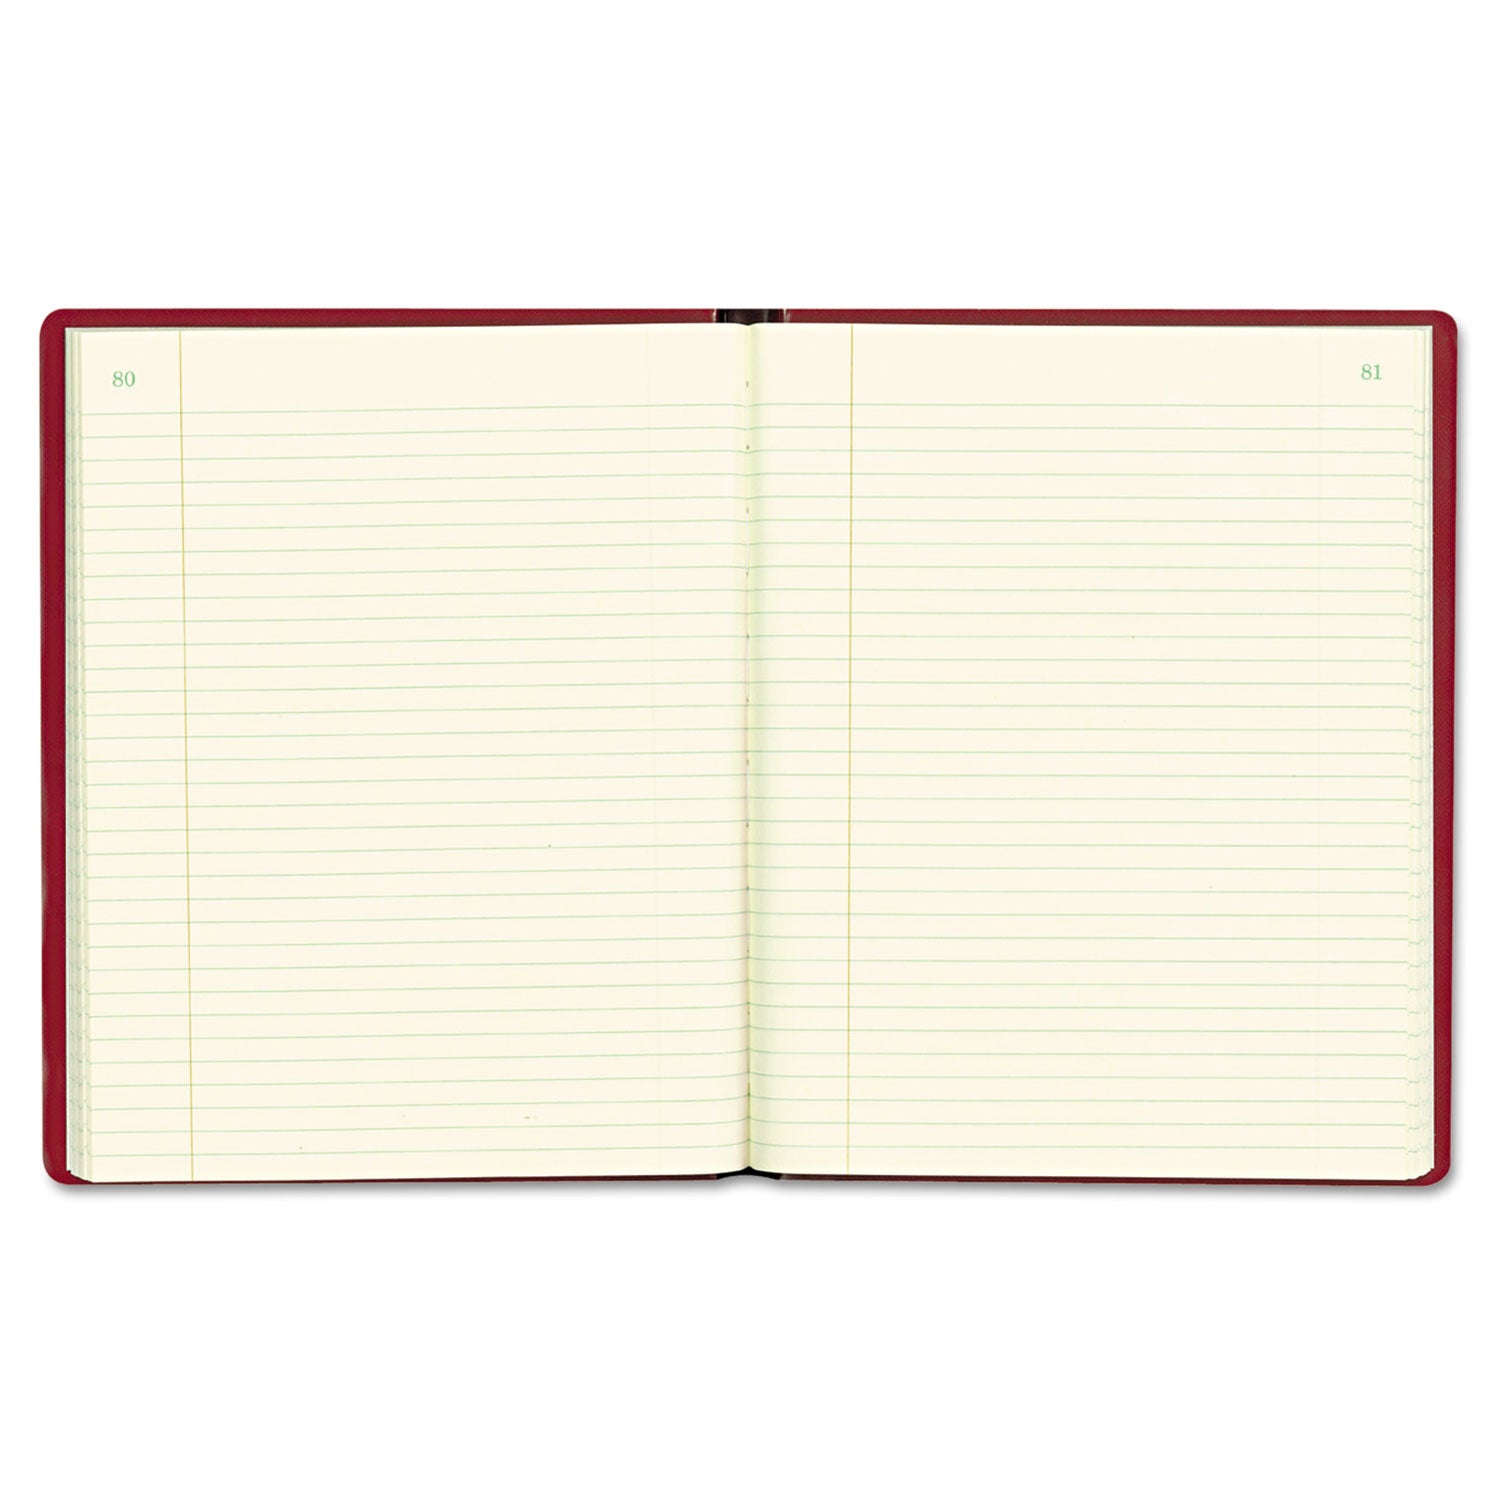 national-brand-red-vinyl-series-journal-1-subject-medium-college-rule-red-cover-300-10-x-775-sheets_red57231 - 1